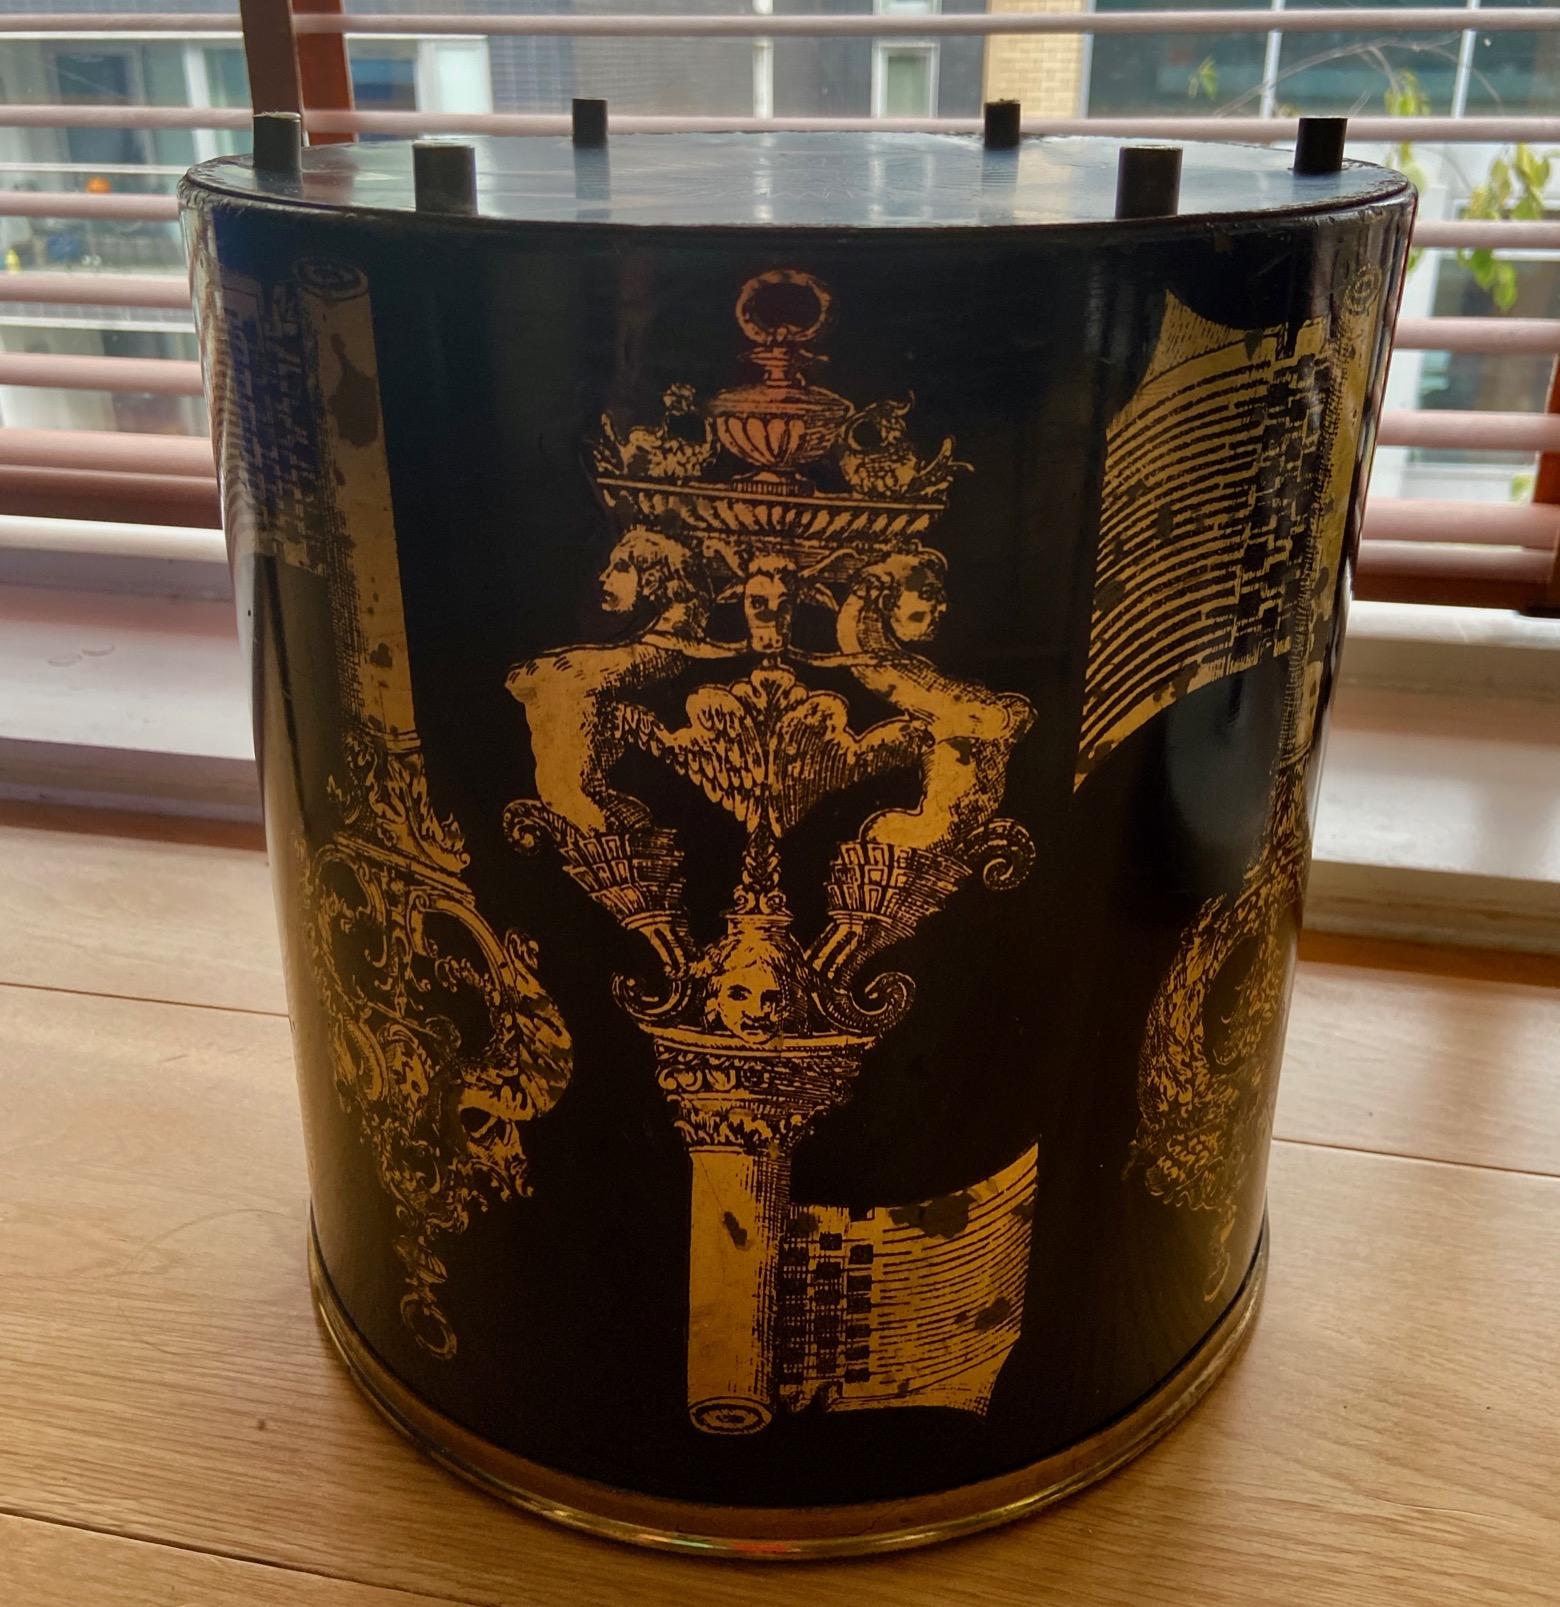 Piero Fornasetti 1950s Black and Gold Stencilled Key Design Paper Waste Basket For Sale 7